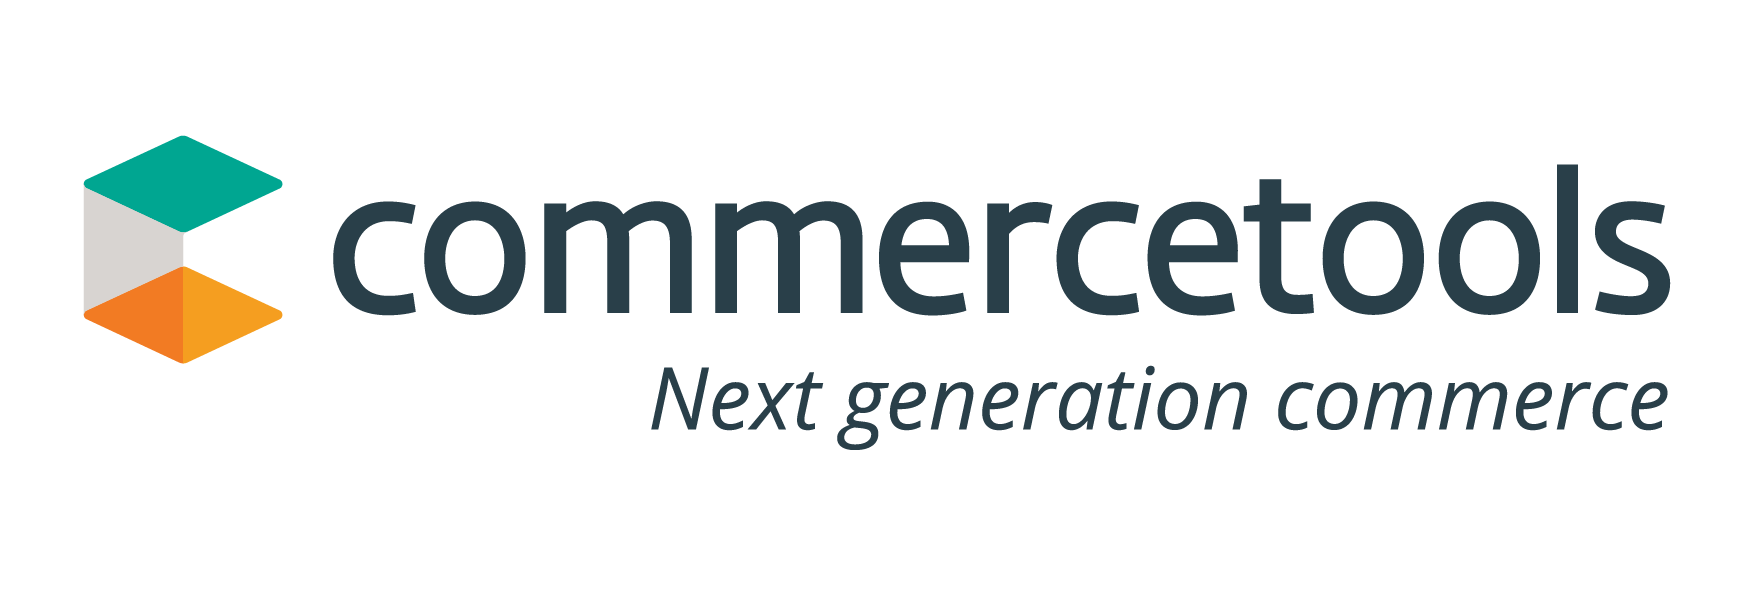 The global leader in composable commerce | commercetools